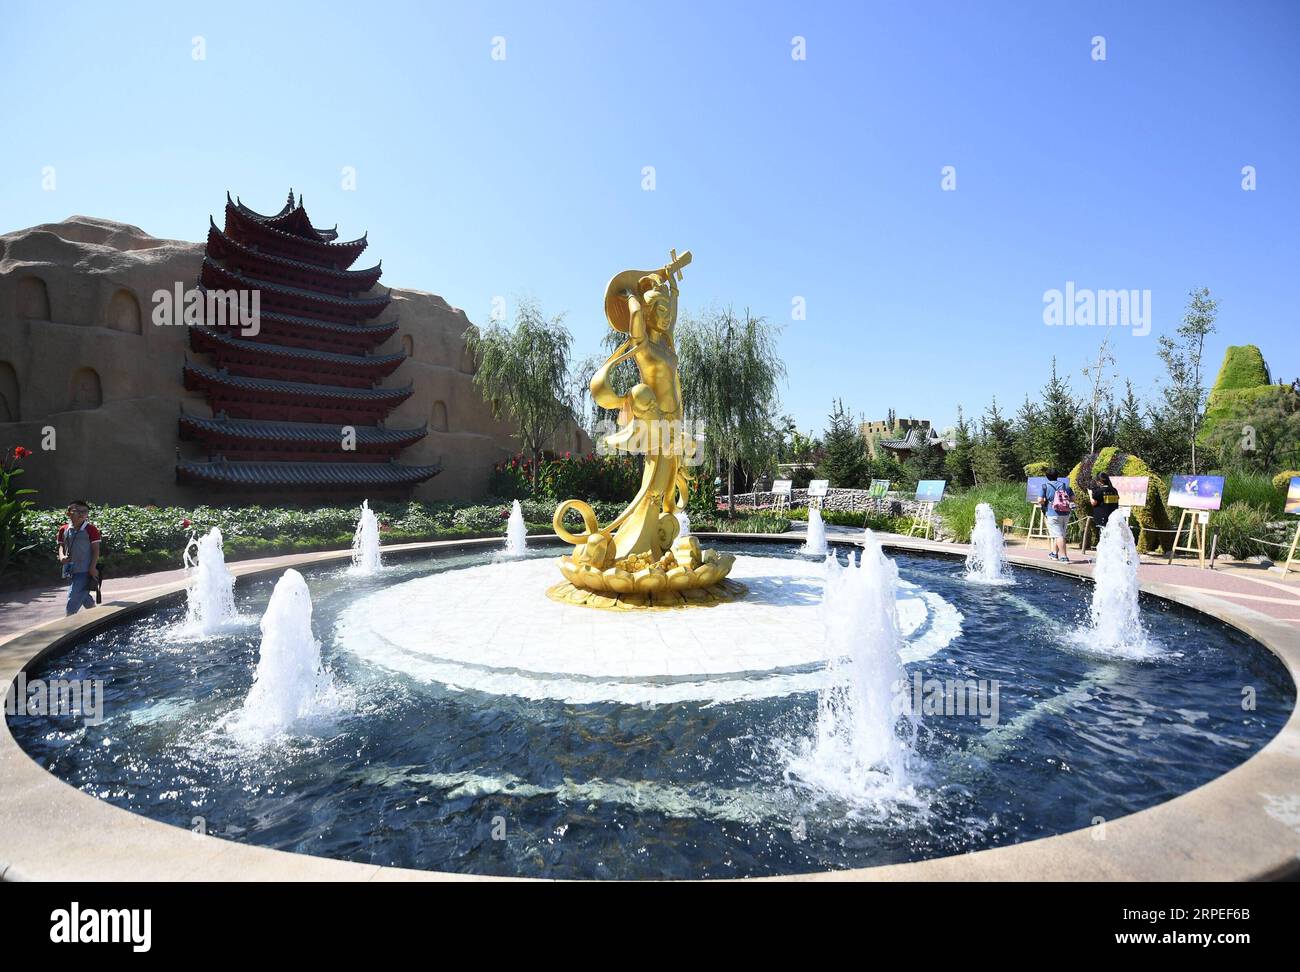 (190827) -- GANSU, Aug. 27, 2019 -- Tourists visit the Gansu Garden at the Beijing International Horticultural Exhibition in Beijing, capital of China, Aug. 25, 2019. Located in the convergence zone of the Loess Plateau, the Mongolian Plateau and the Qinghai-Tibet Plateau, Gansu Province in northwest China strides across various landforms including grasslands, forests, deserts, wetlands and mountains. In recent years, through persistent efforts on protecting water conservation area, containing desertification and resuming forests from farmlands, the ecological environment of Gansu has witnesse Stock Photo